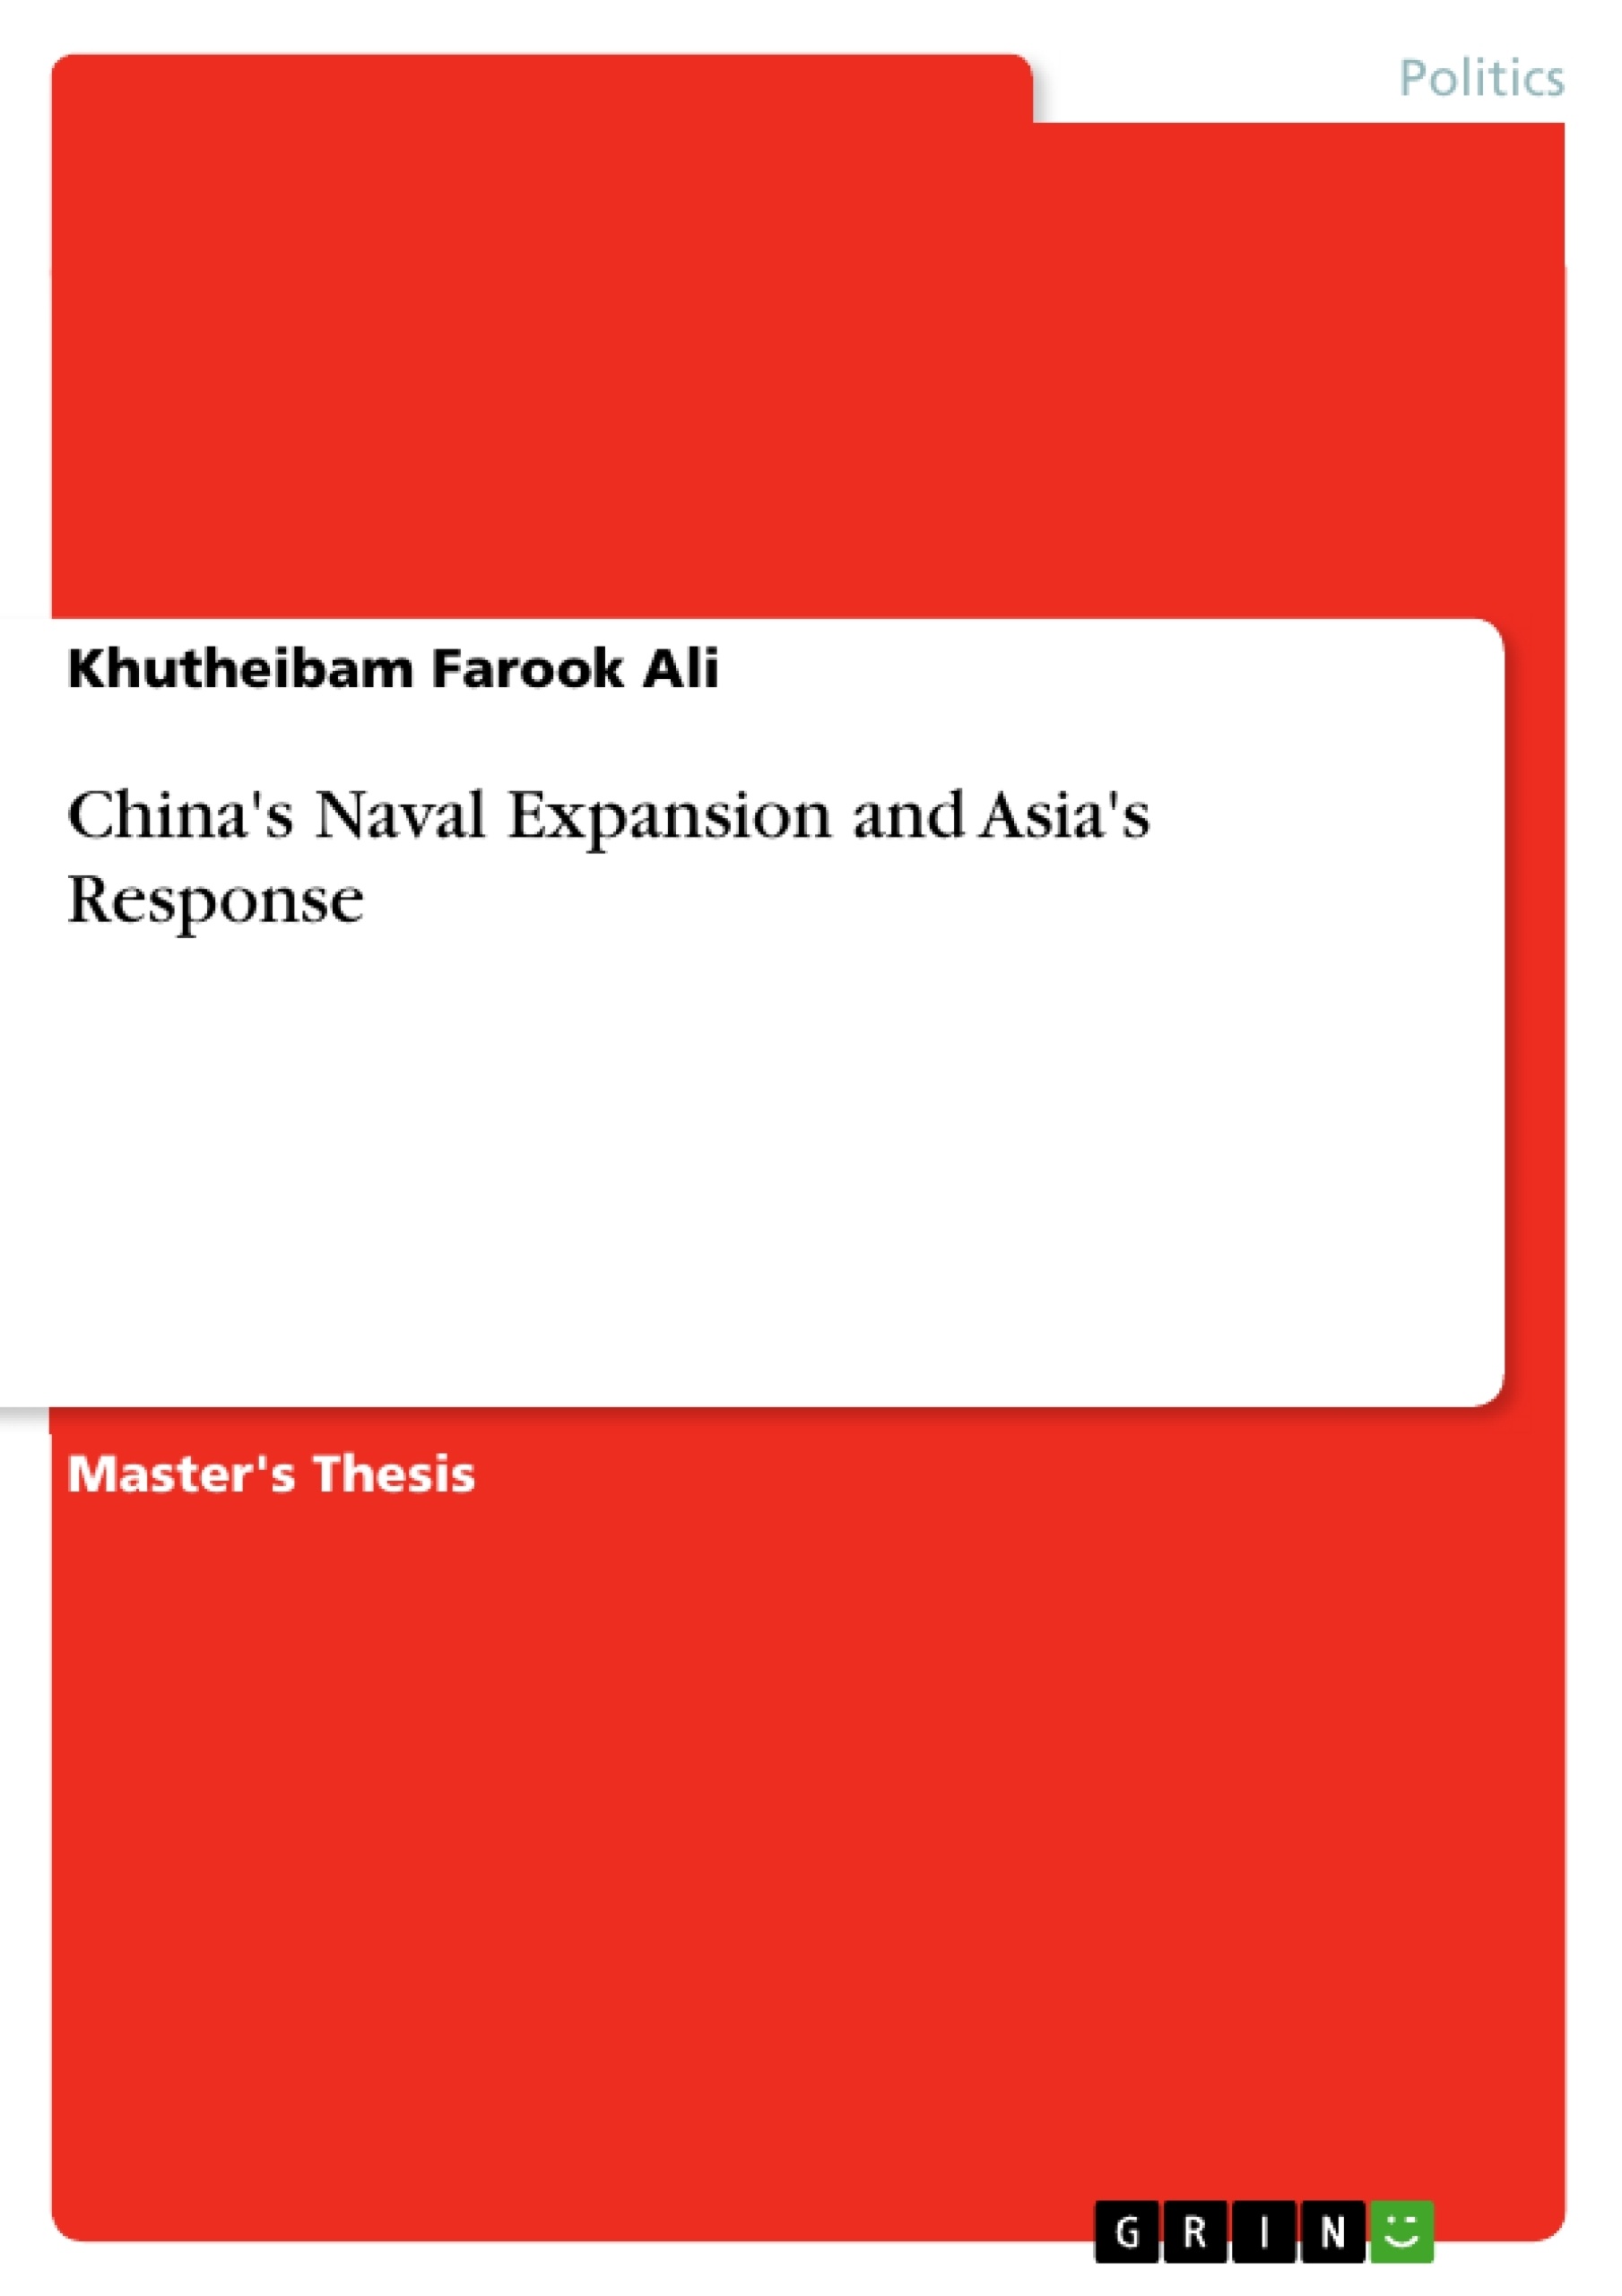 Title: China's Naval Expansion and Asia's Response